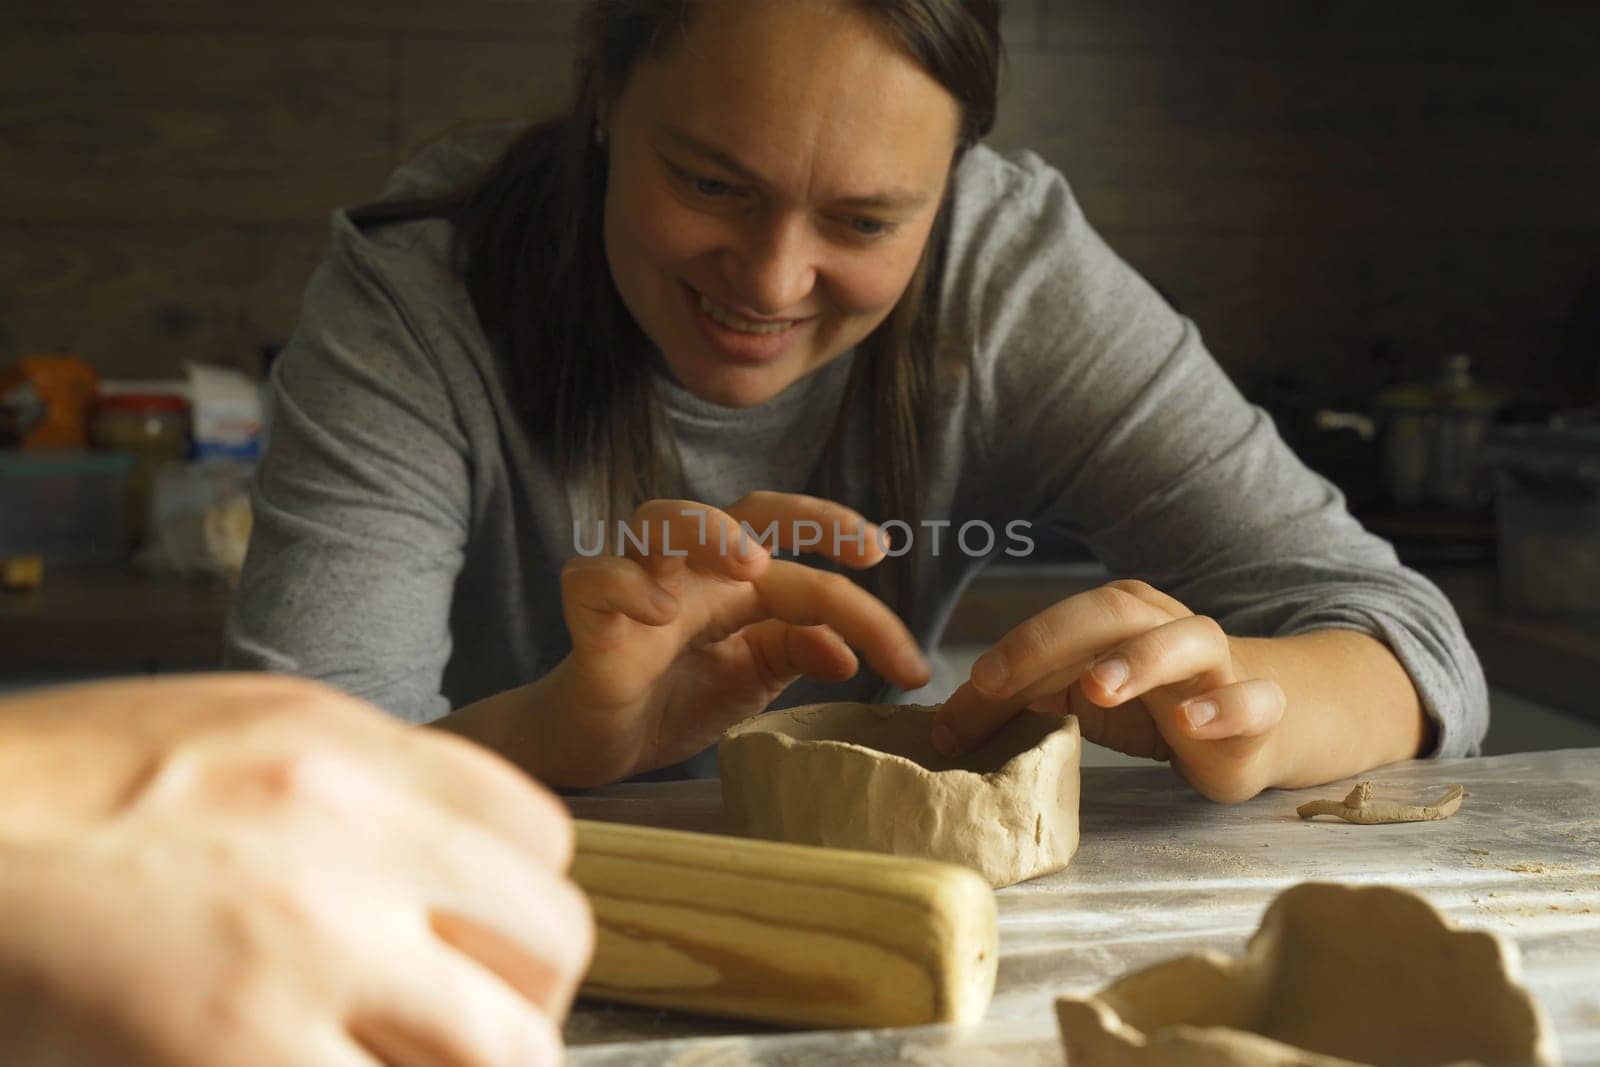 A woman makes a clay product with her hands - a ceramic pot. by Sd28DimoN_1976